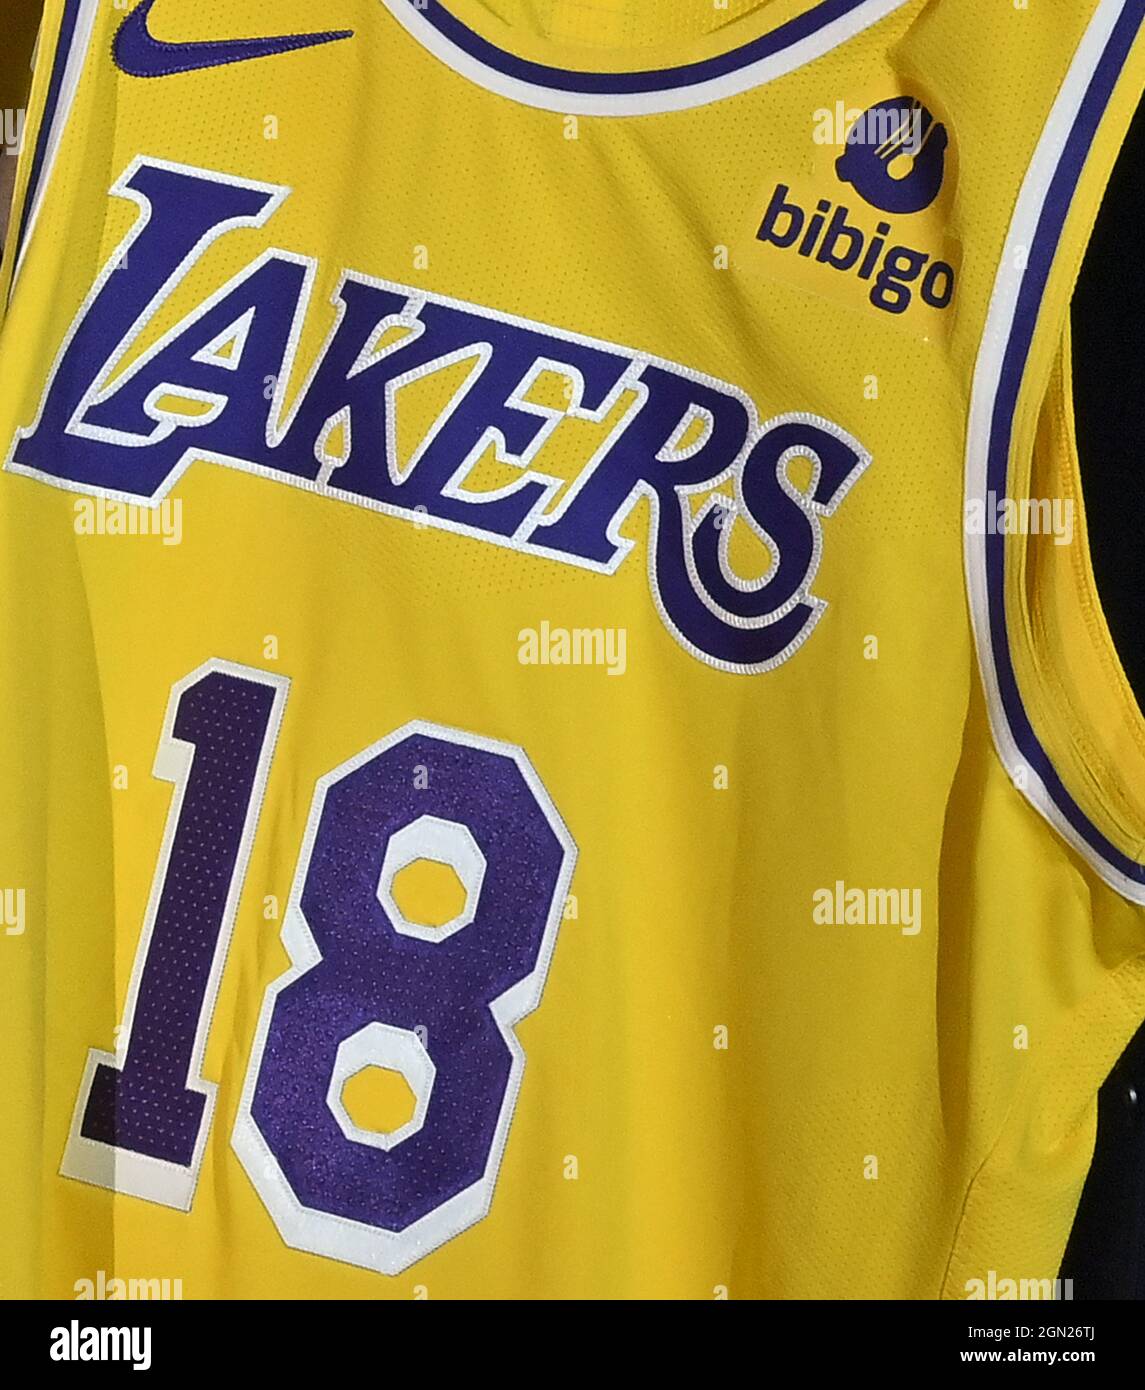 A new Los Angeles Lakers' jersey with a Bibigo patch is seen during the team's kick-off event to announce a new global marketing partnership with Bibigo, a popular South Korean food company at the UCLA Health Training Center in El Segundo, California on Monday, September 20, 2021. Ahead of the 2017-18 NBA season, the NBA put into action its patch program that allowed NBA teams to rent out a small square (2.5 inches by 2.5 inches) on the left shoulder of their jerseys to outside companies. The Lakers' $100 million partnership with Bibigo is now the largest jersey patch deal in the NBA. It's als Stock Photo